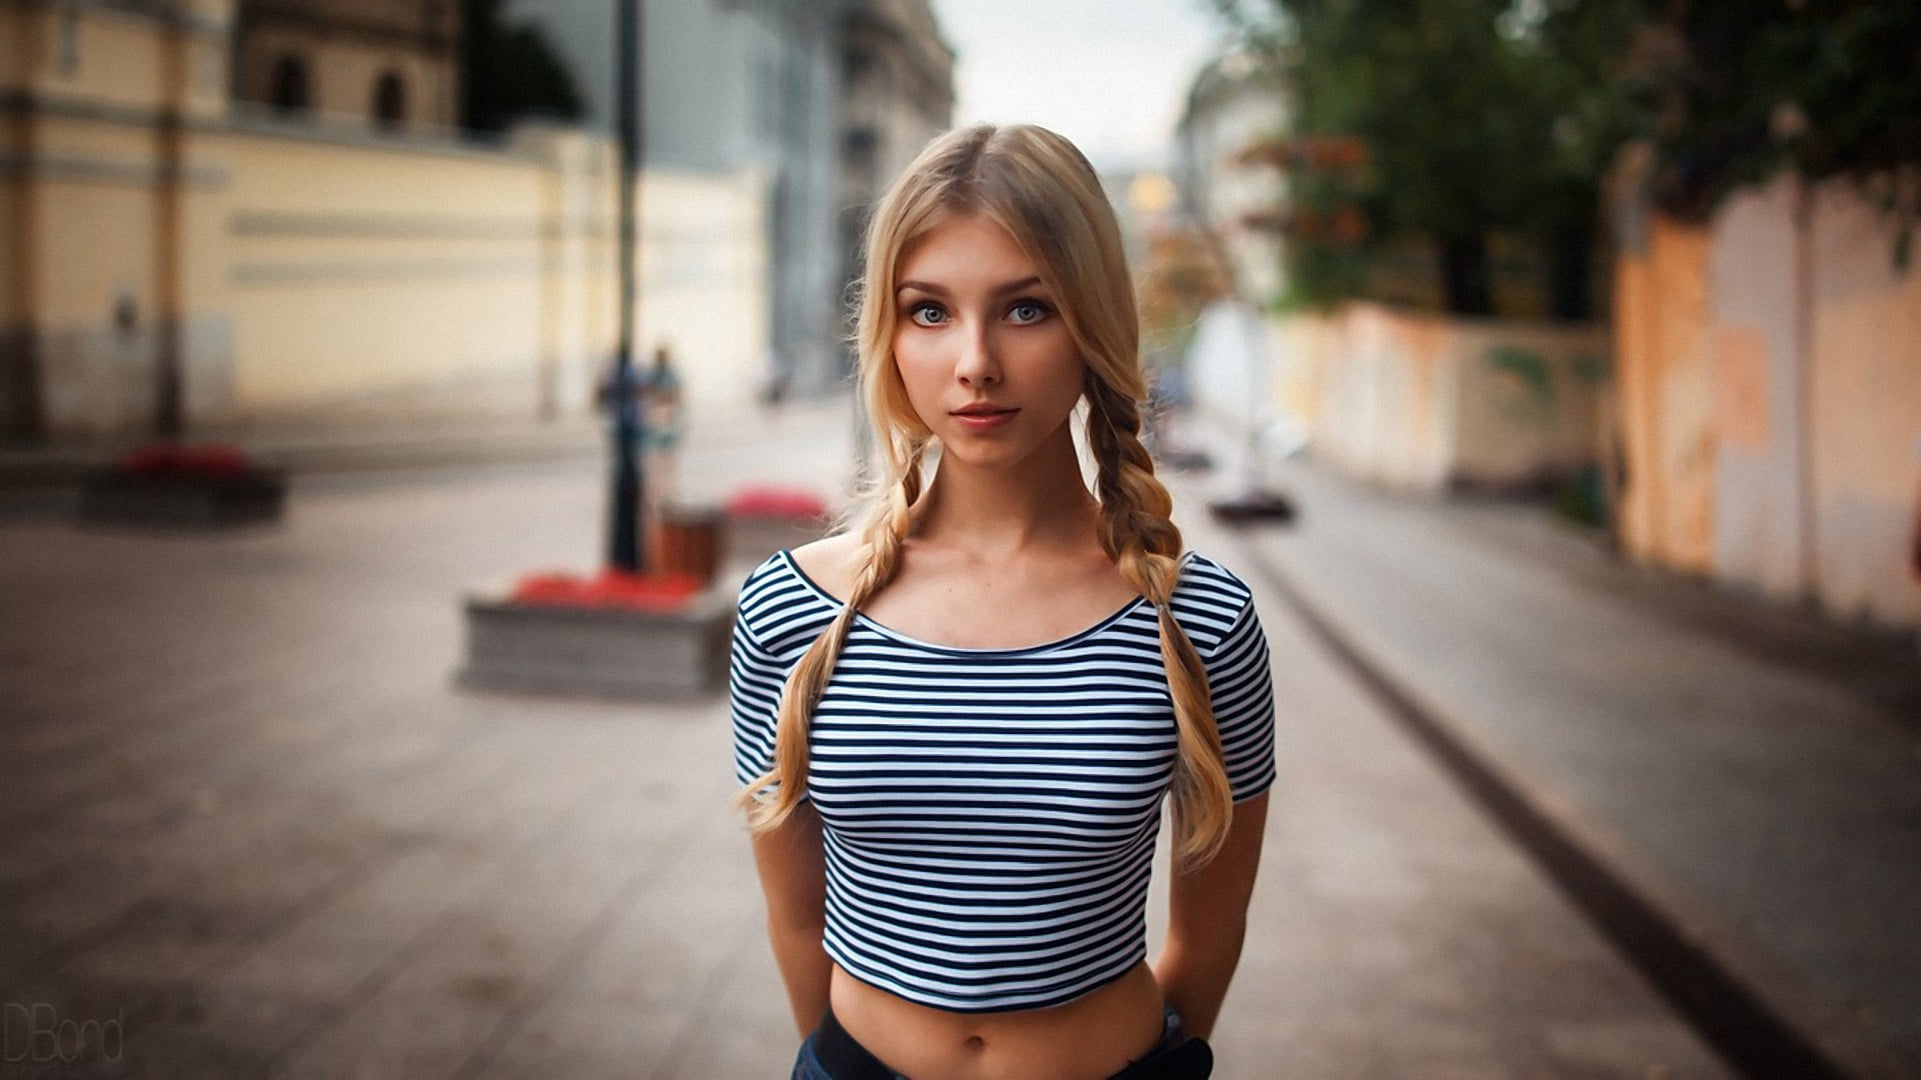 women's white and black striped top, selective focus photography of woman standing on street